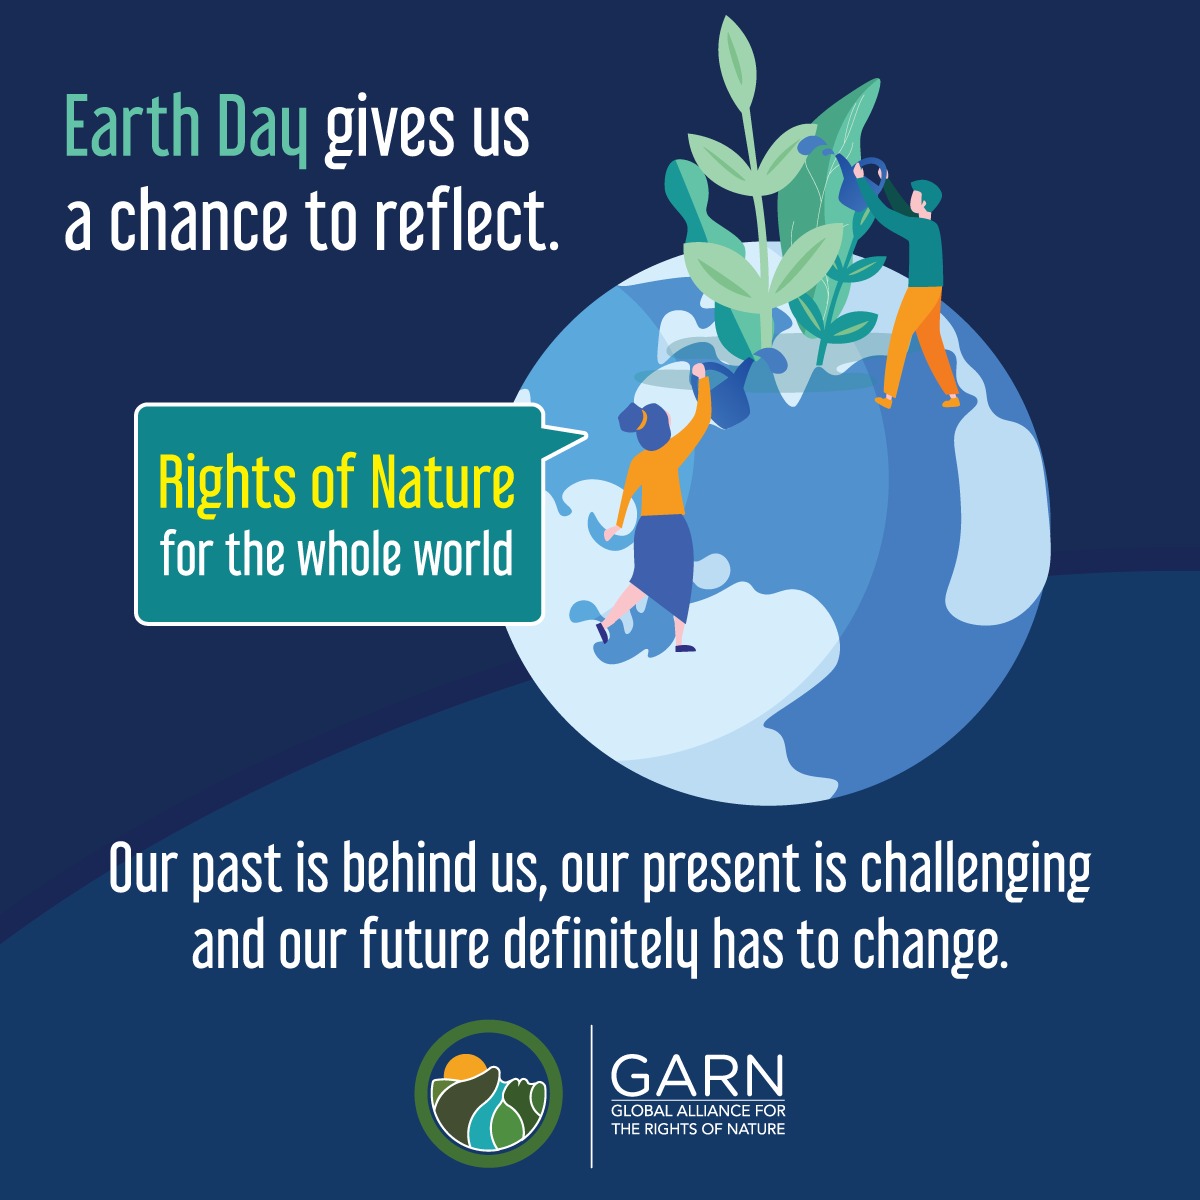 EARTH DAY 2020 – A Different Earth Day to go down in history